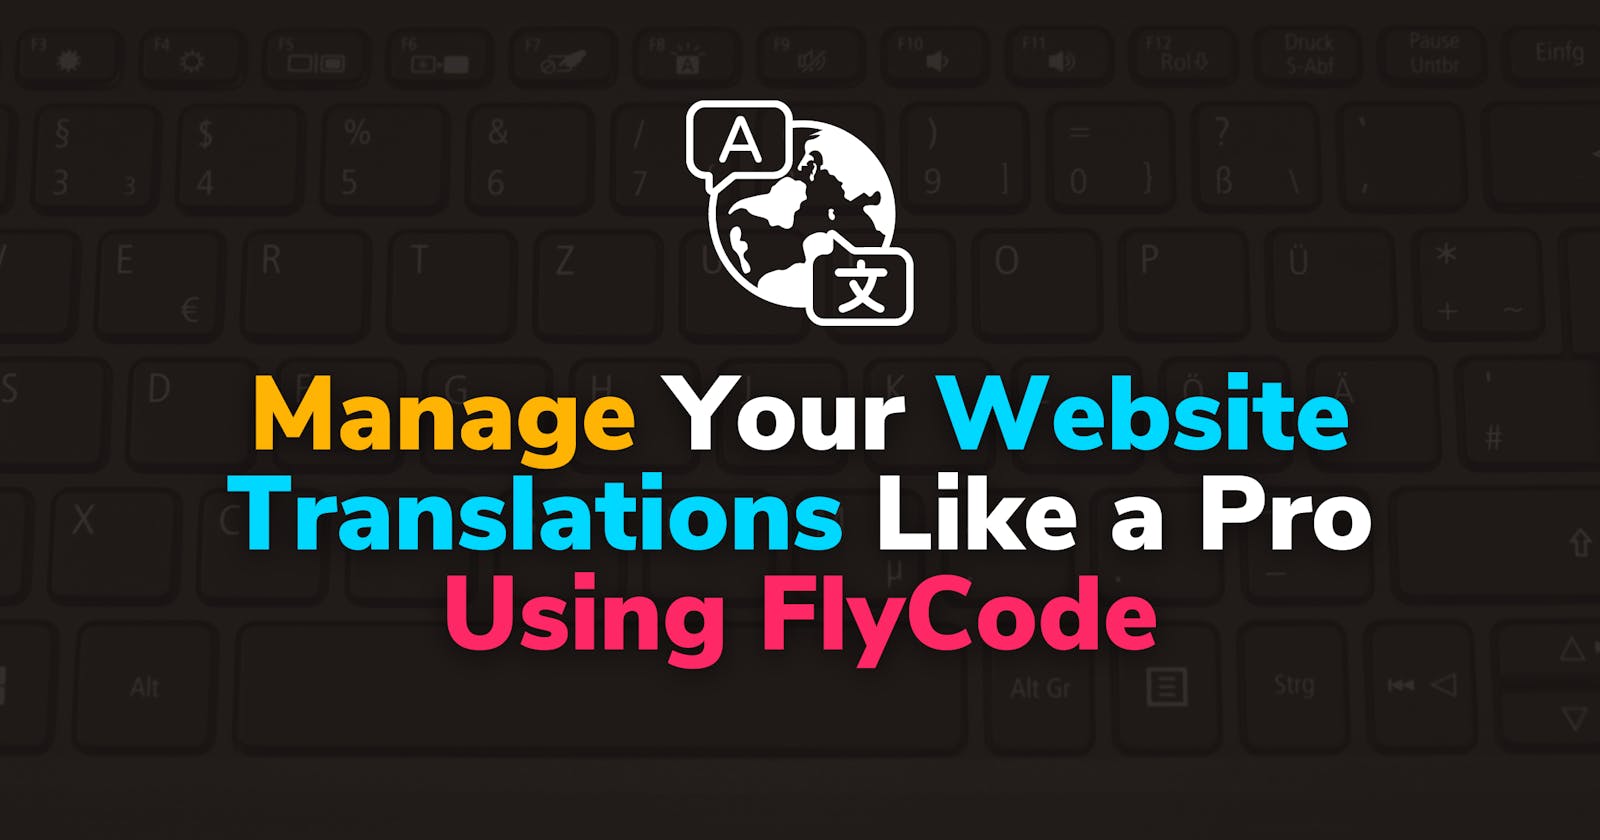 Step-By-Step: Manage Your Website Translations Like a Pro Using FlyCode